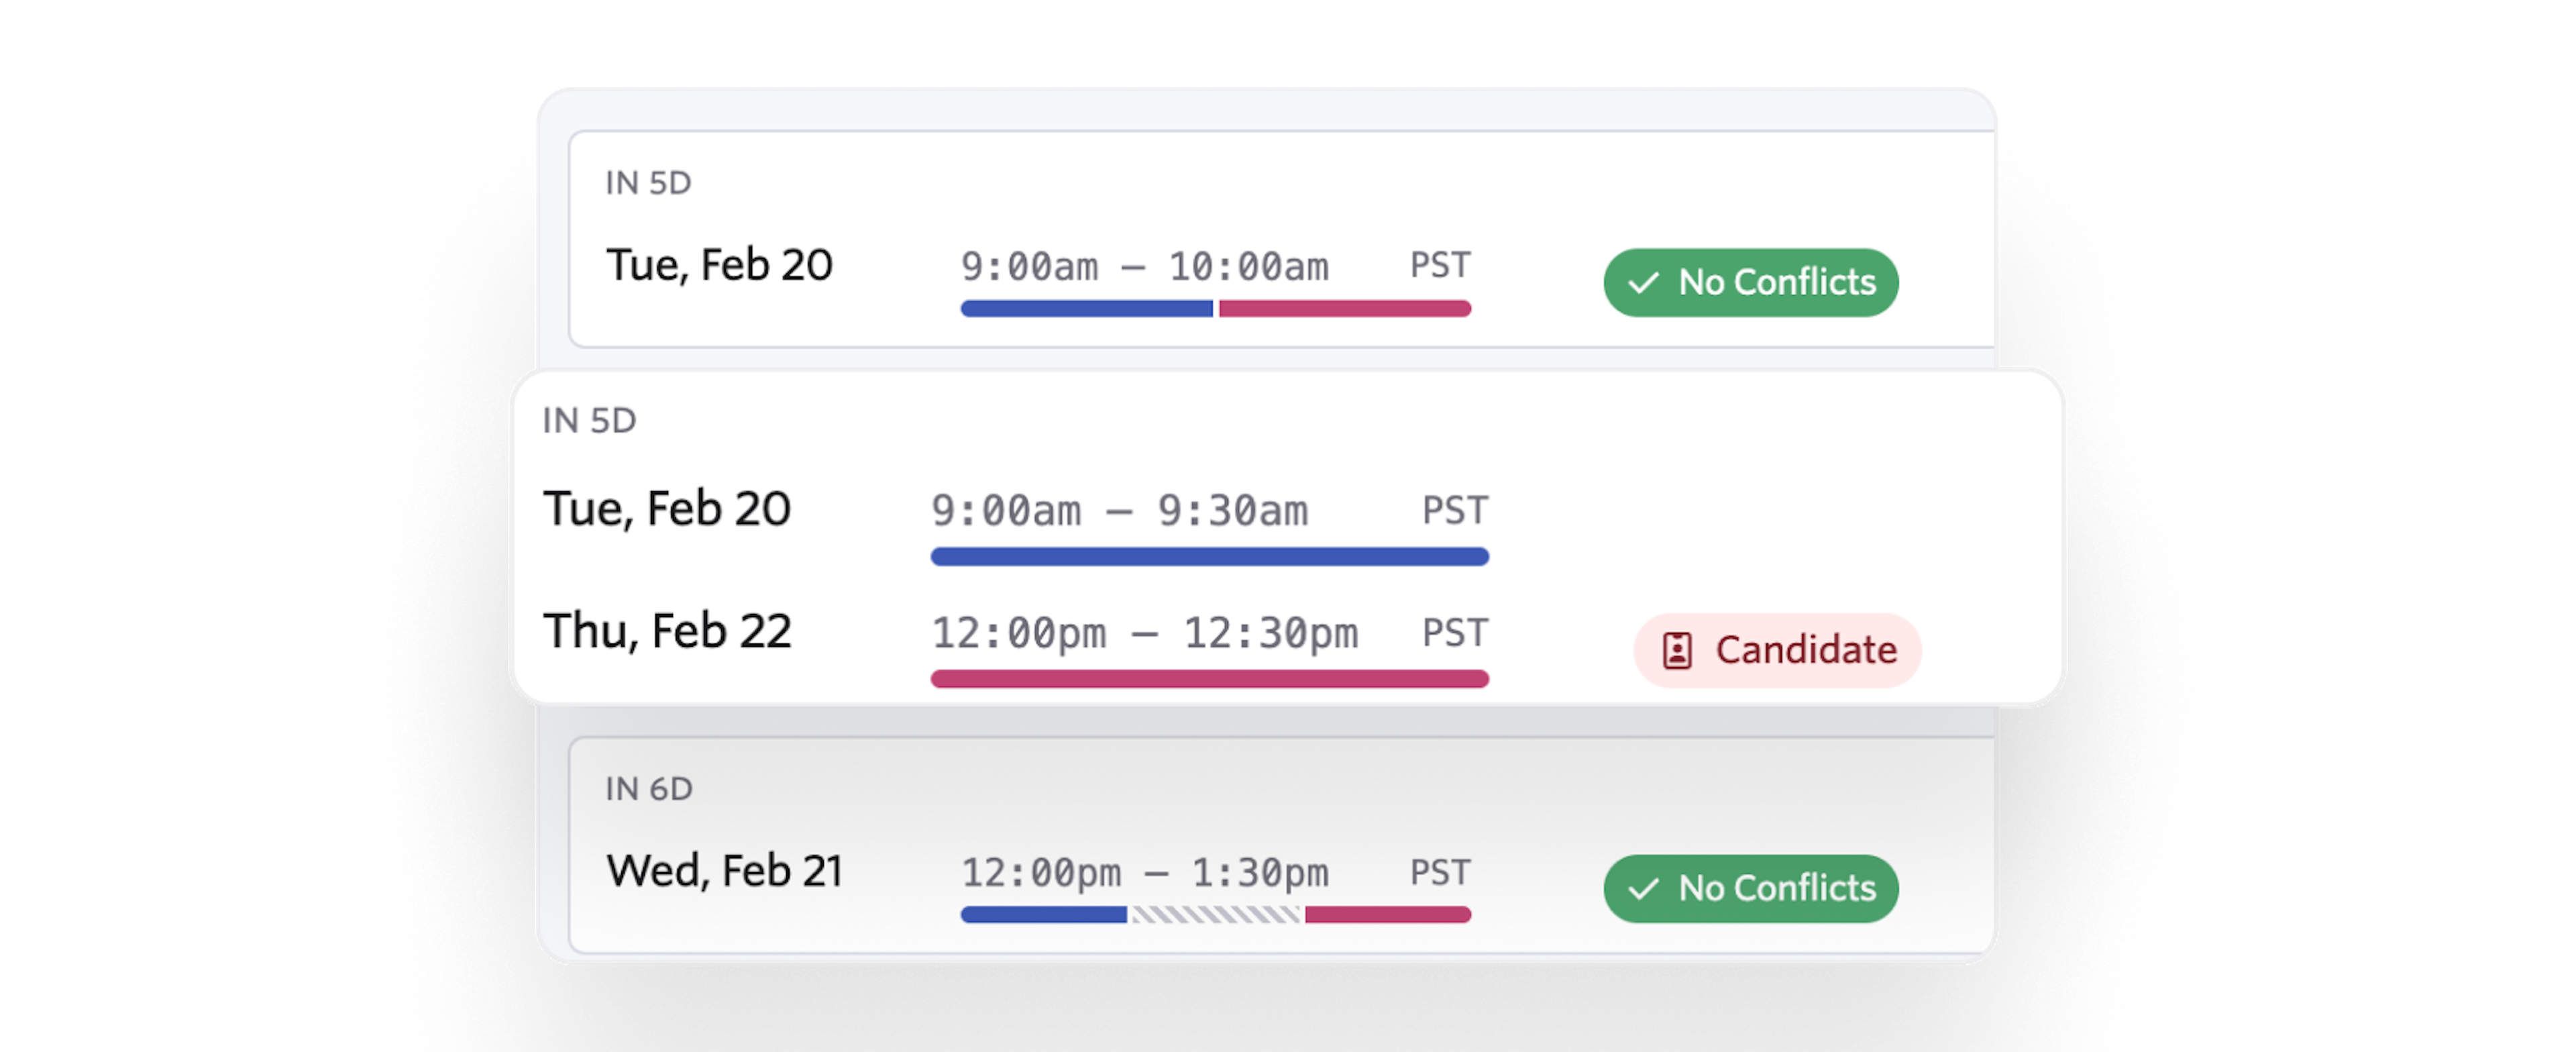 Automatically schedule interviews with candidates